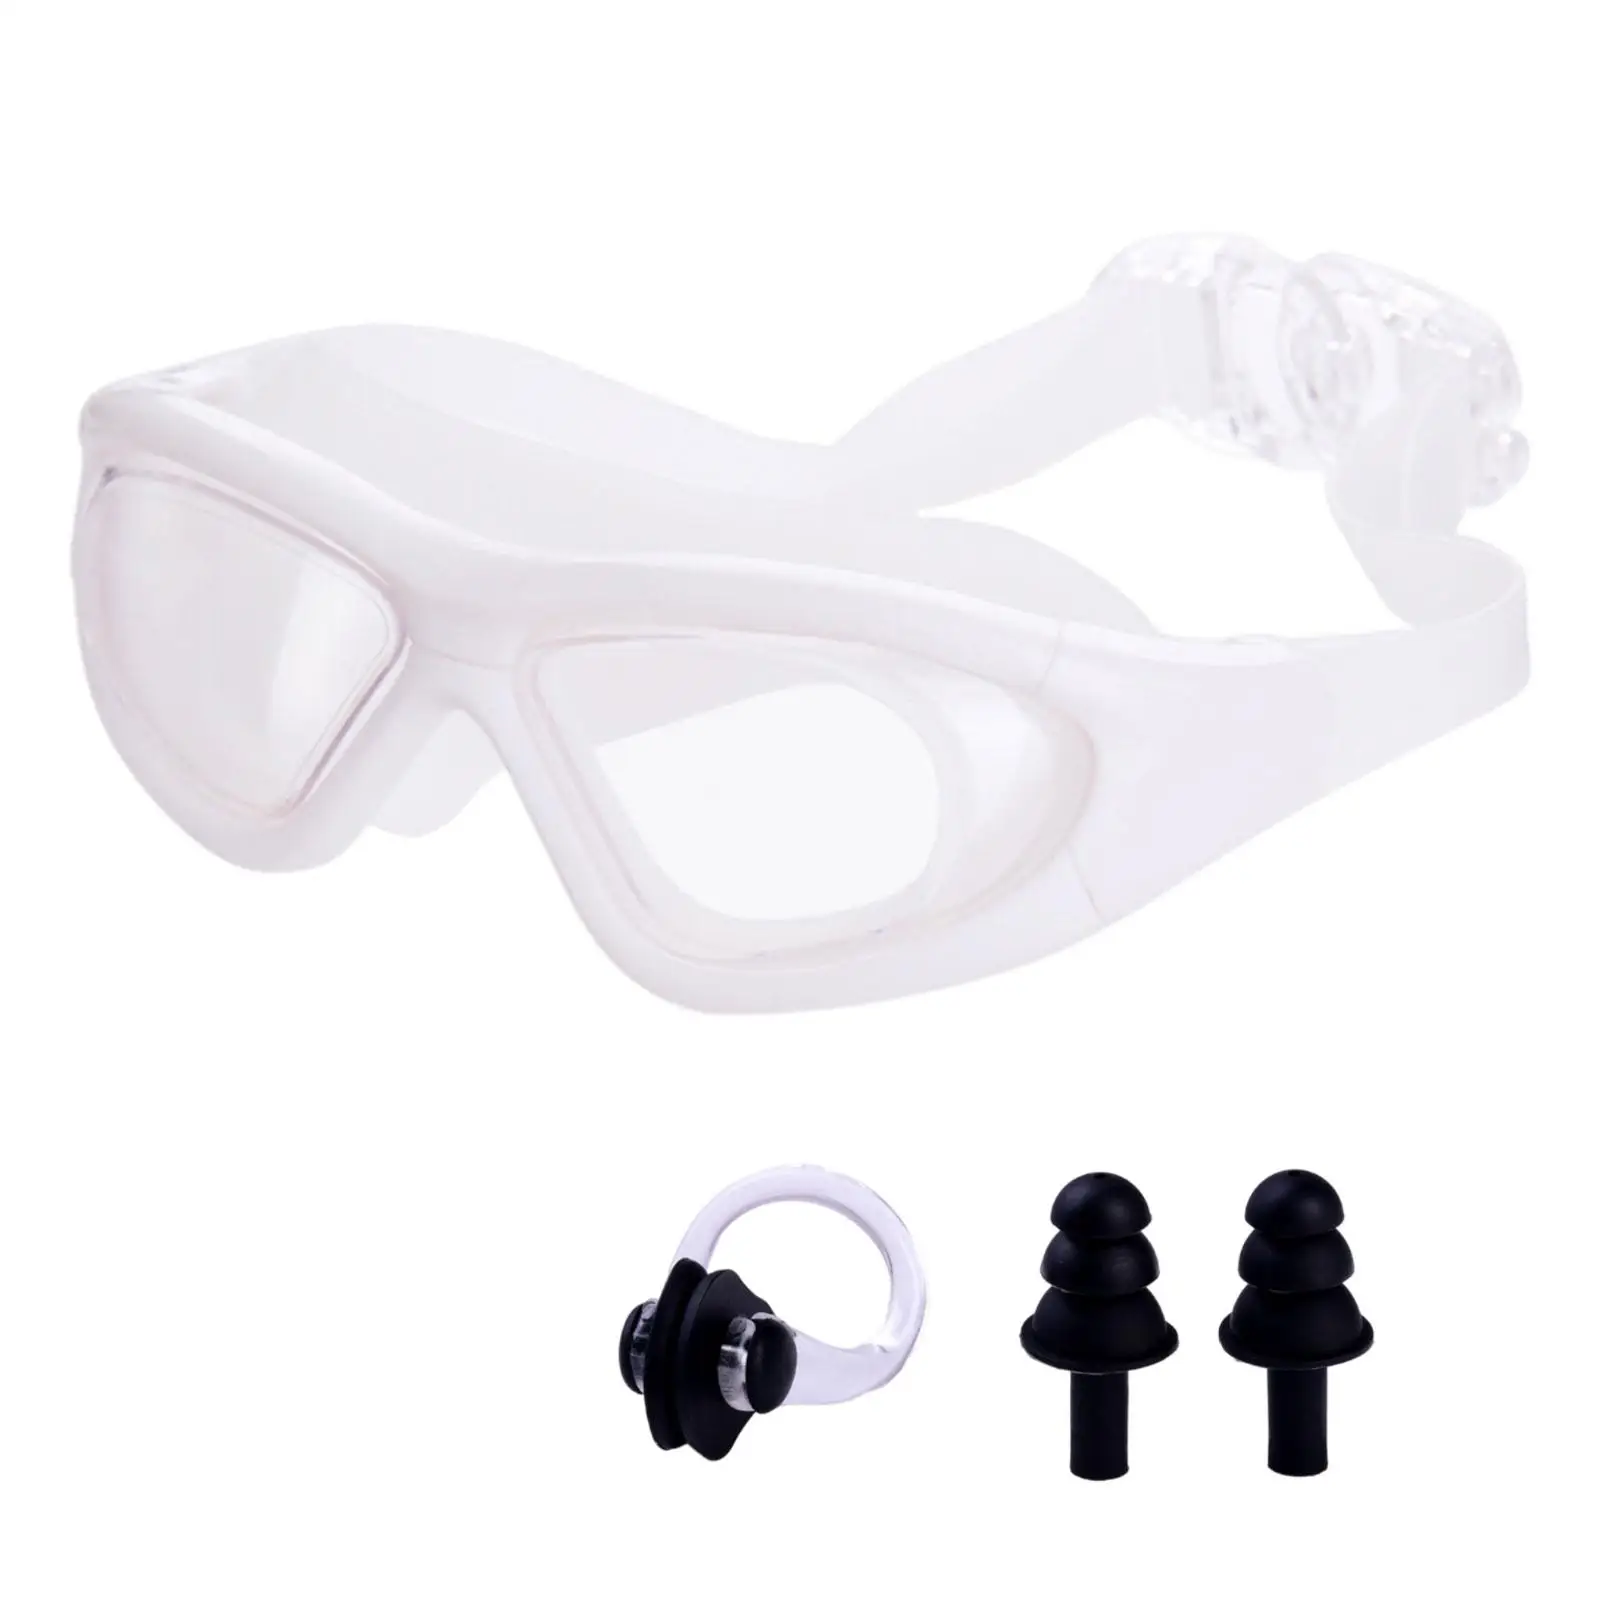 Swimming Goggles Clear Anti Fog No Leaking Professional Portable Wide View Diving Googles for Teens Women Men Unisex Adult